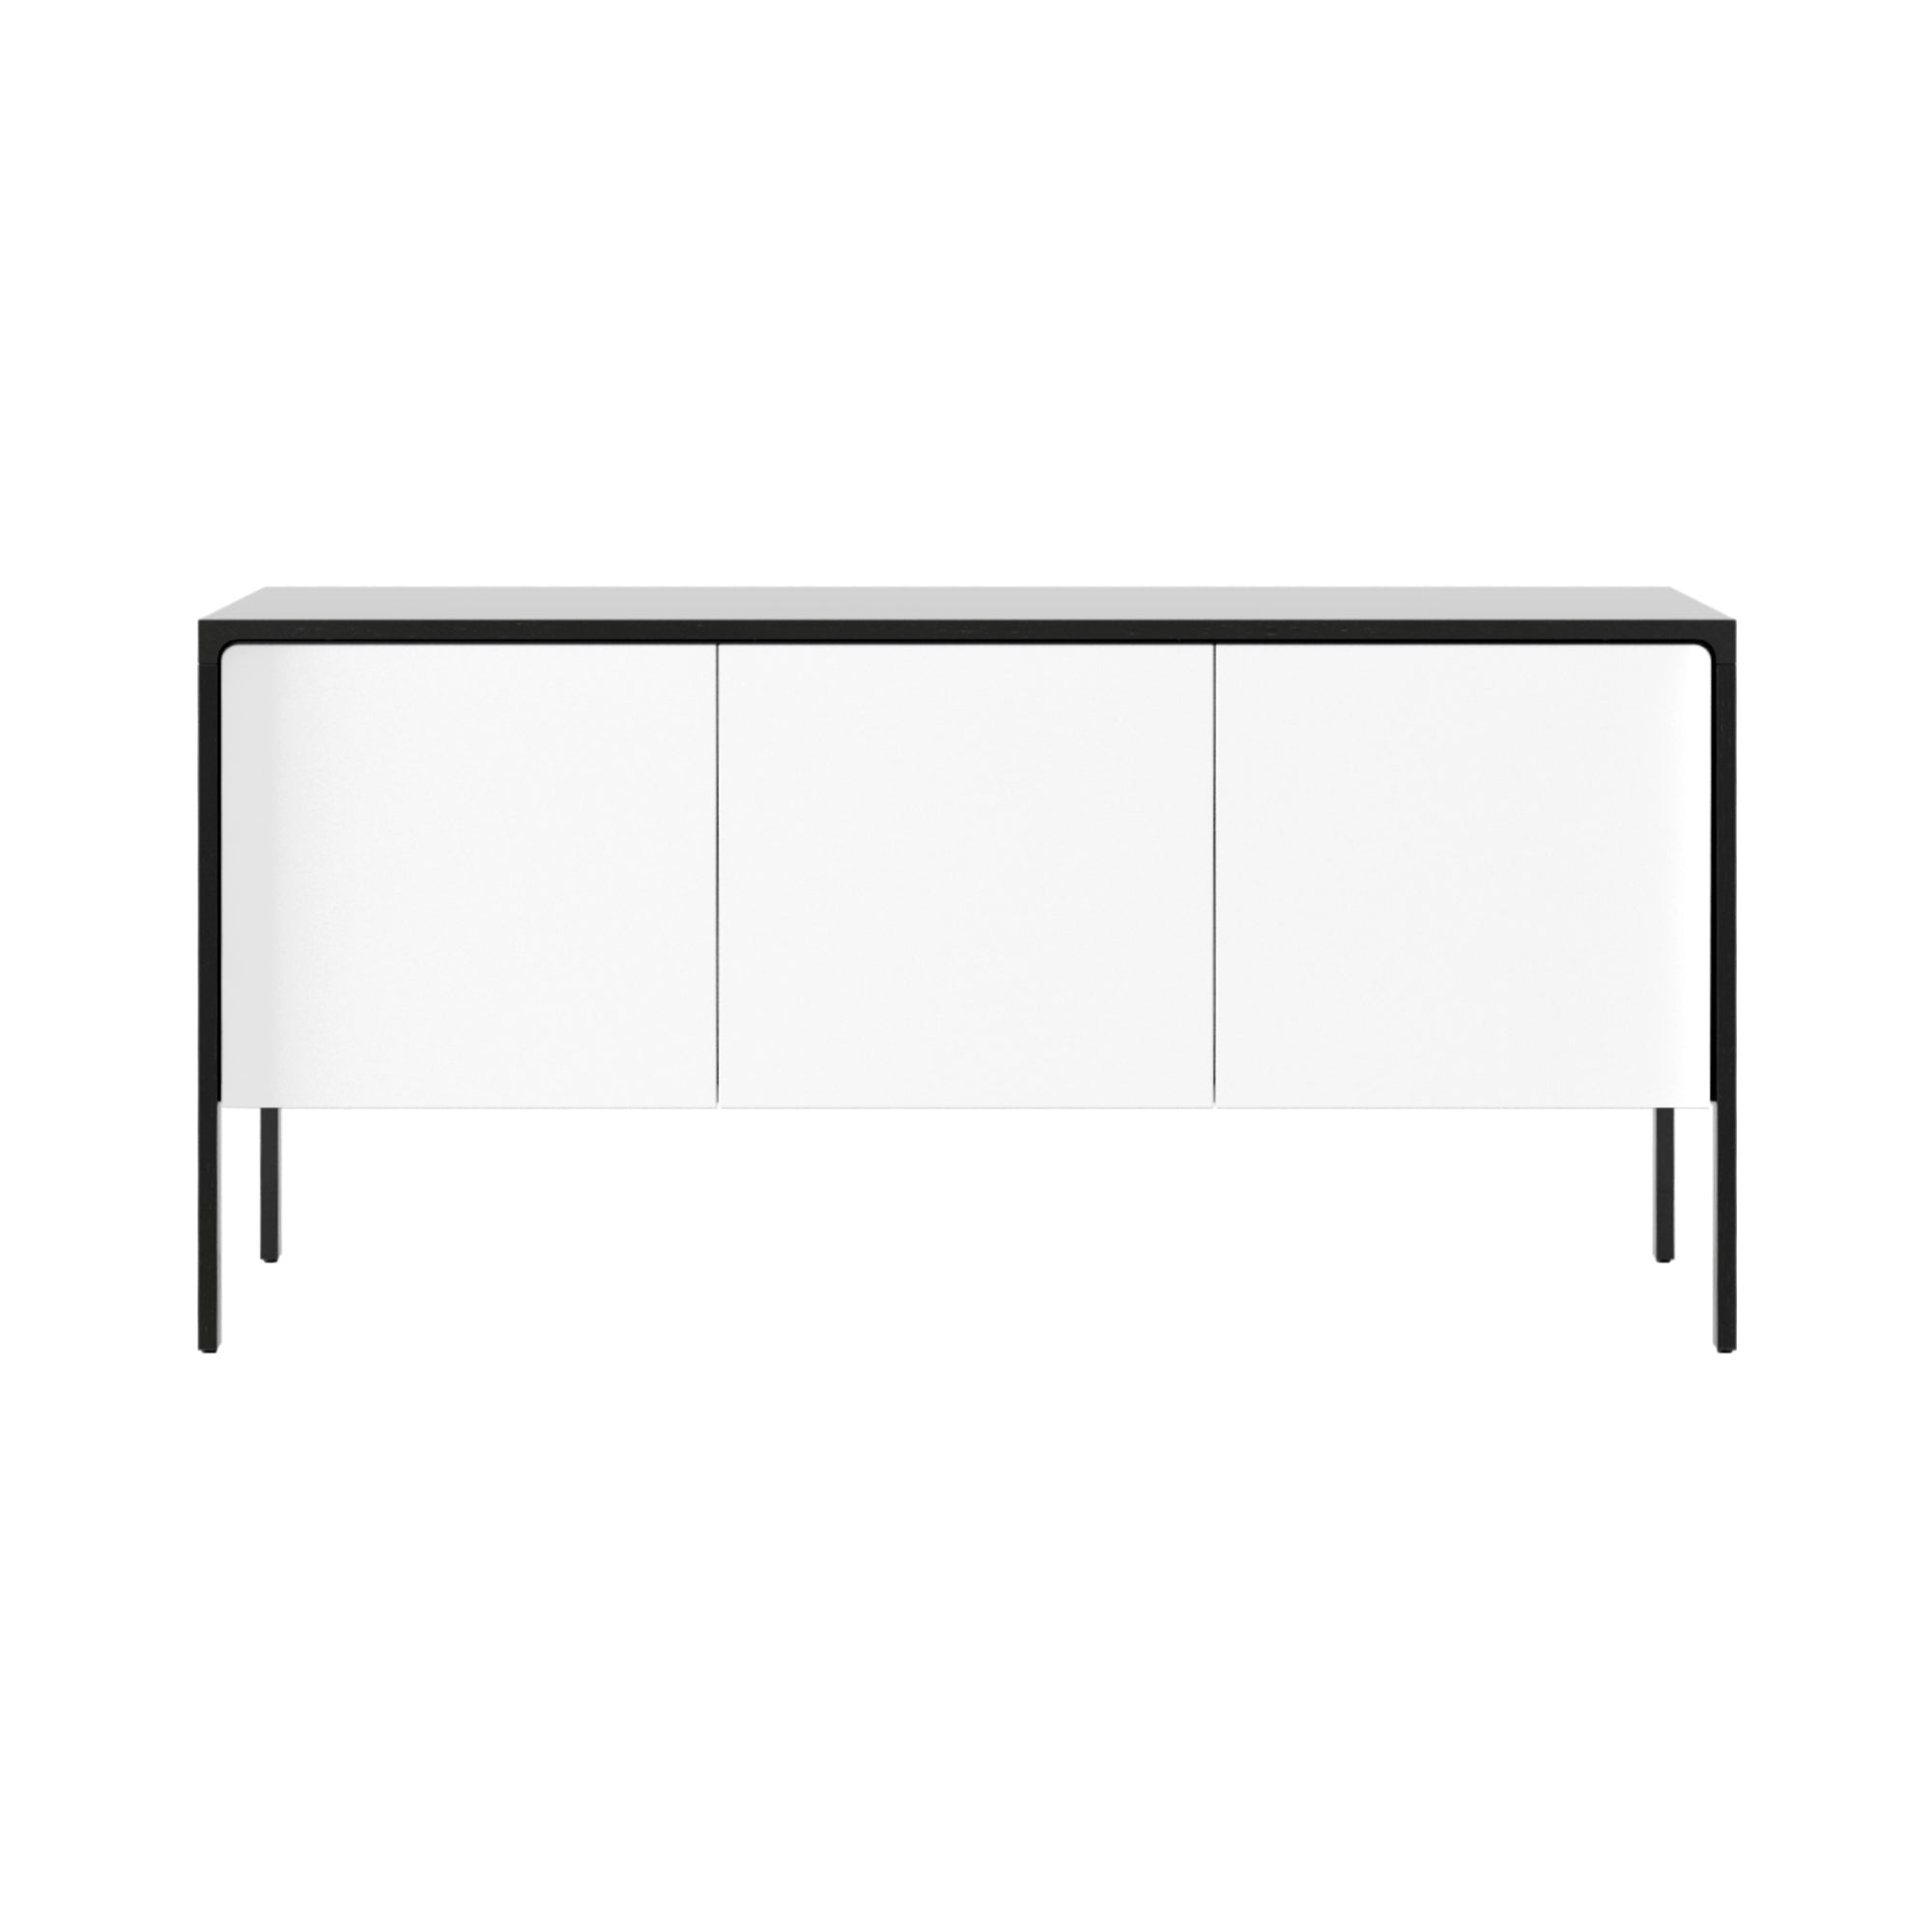 Tactile Sideboard: TAC210 + White Texturised Lacquered + Ebony Stained Oak